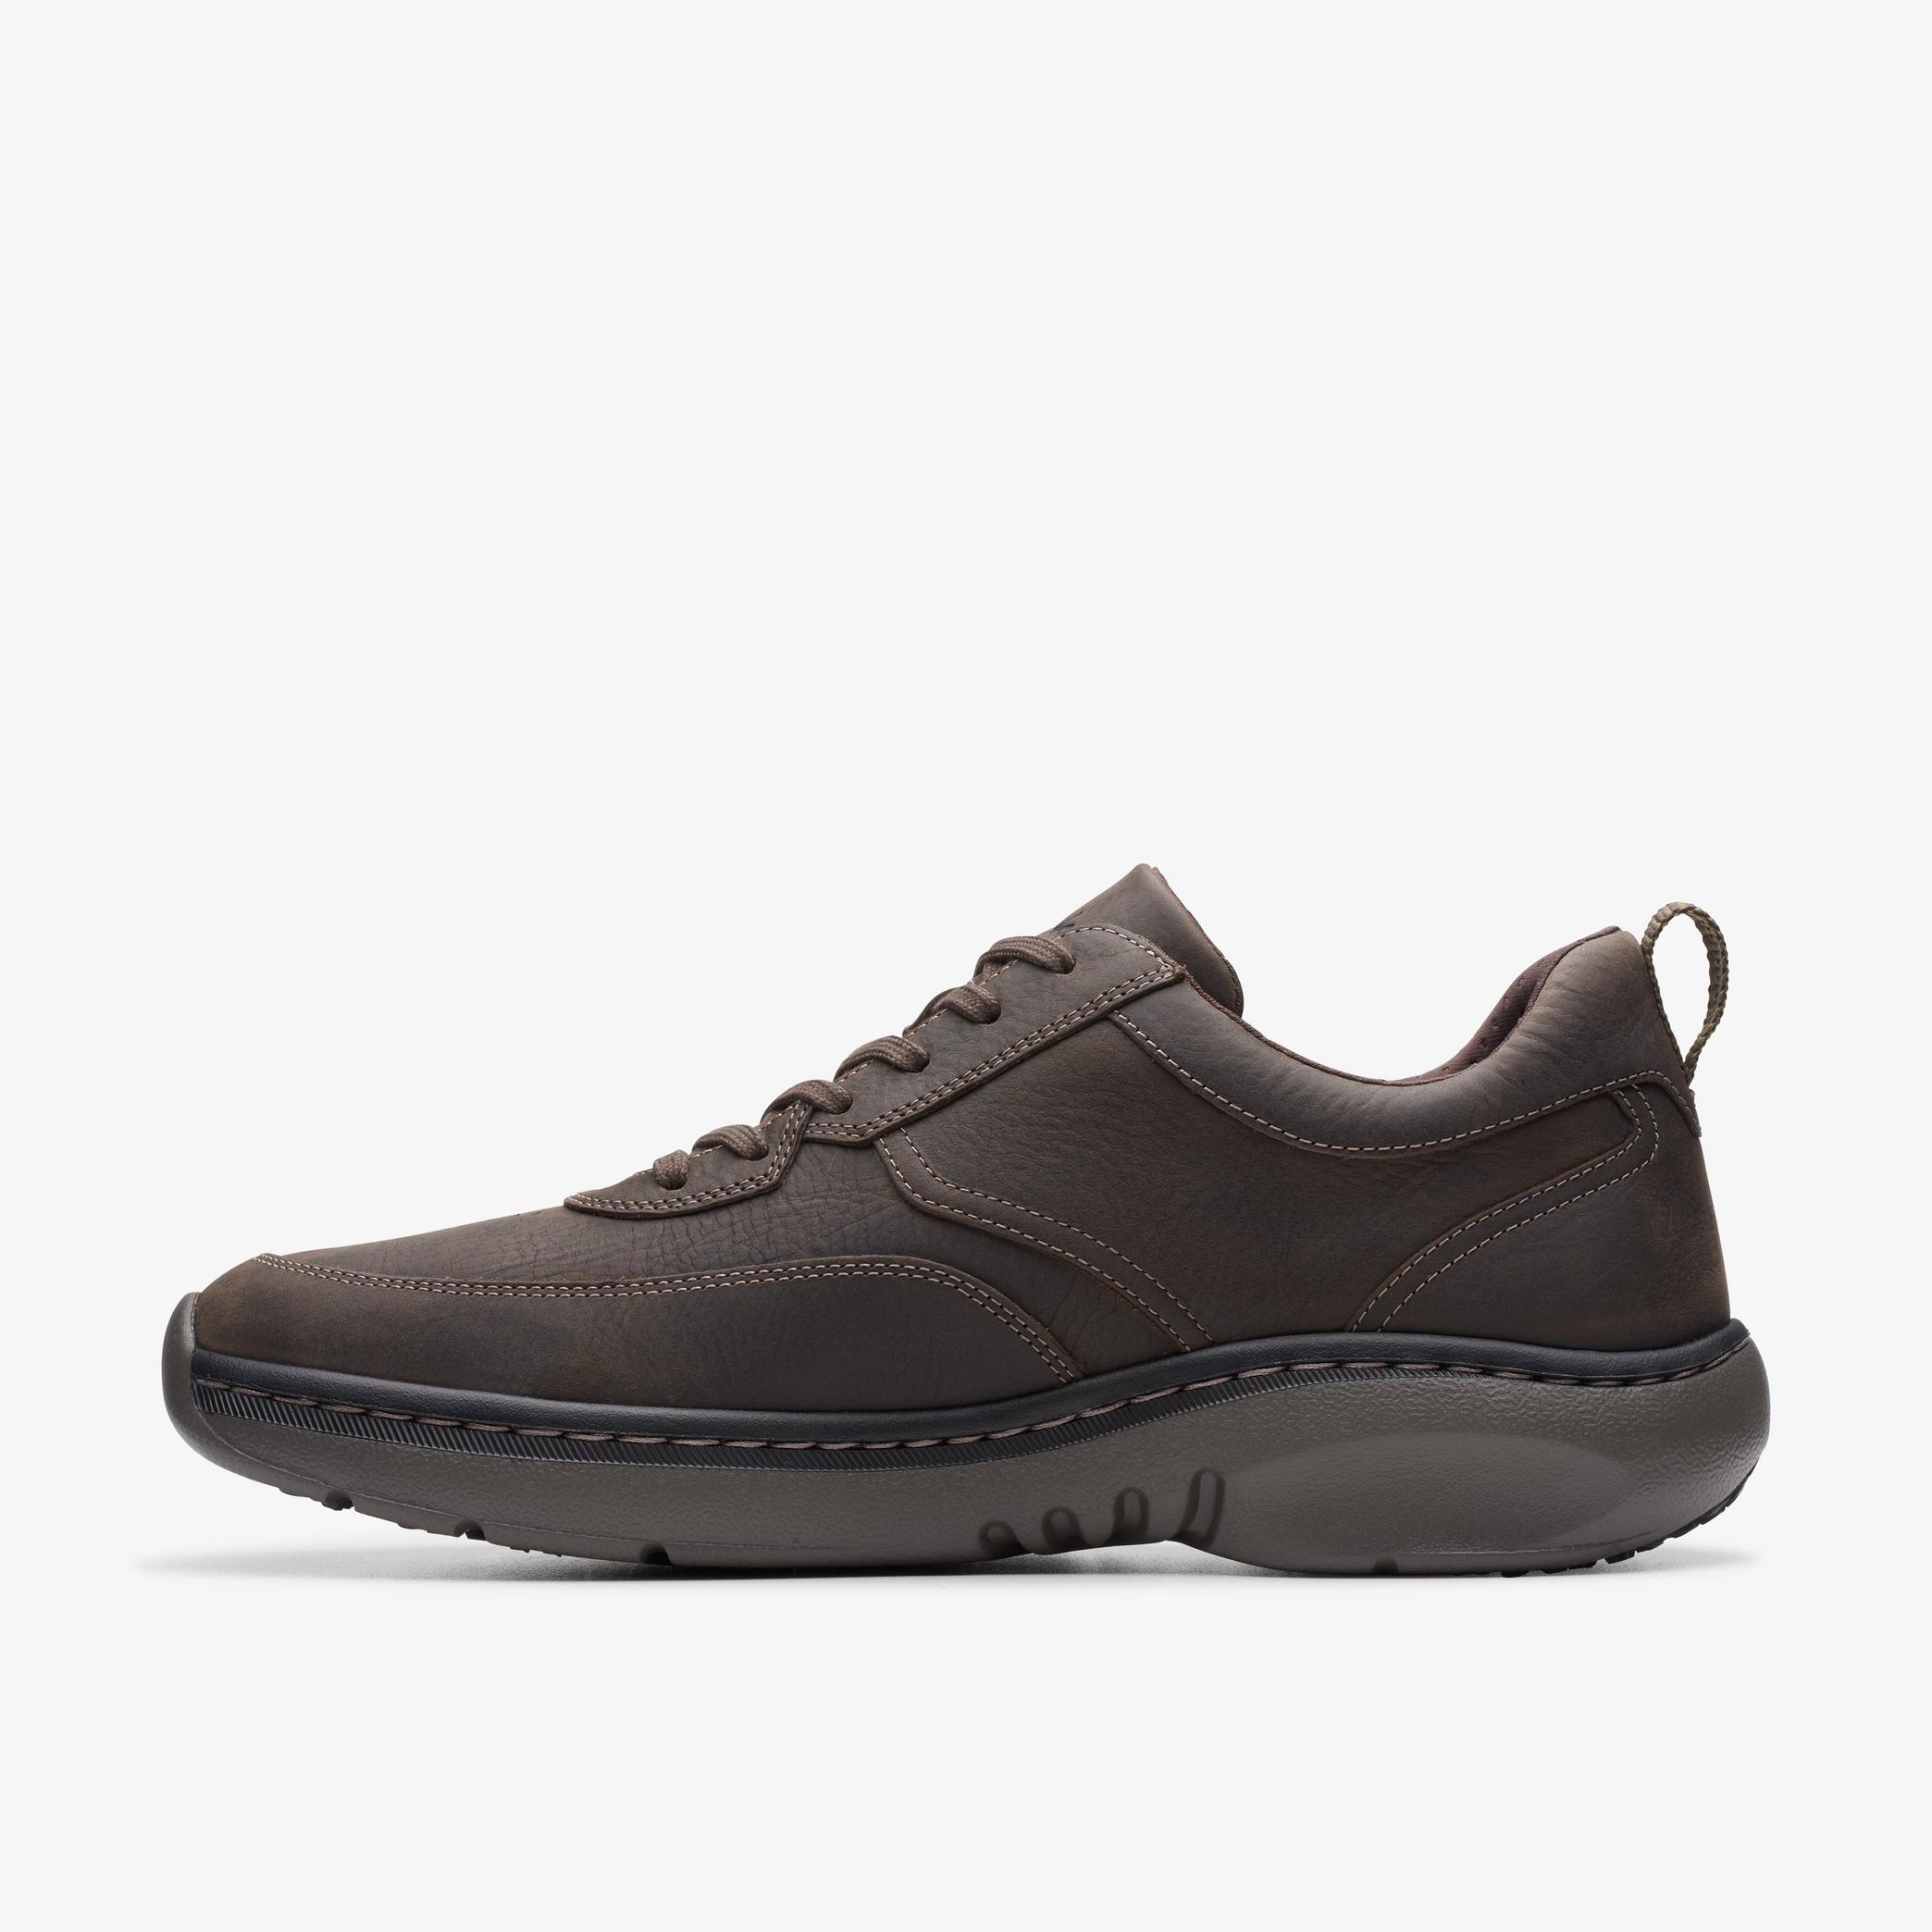 MENS Clarks Pro Lace Dark Brown Tumbled Sneakers | Clarks US